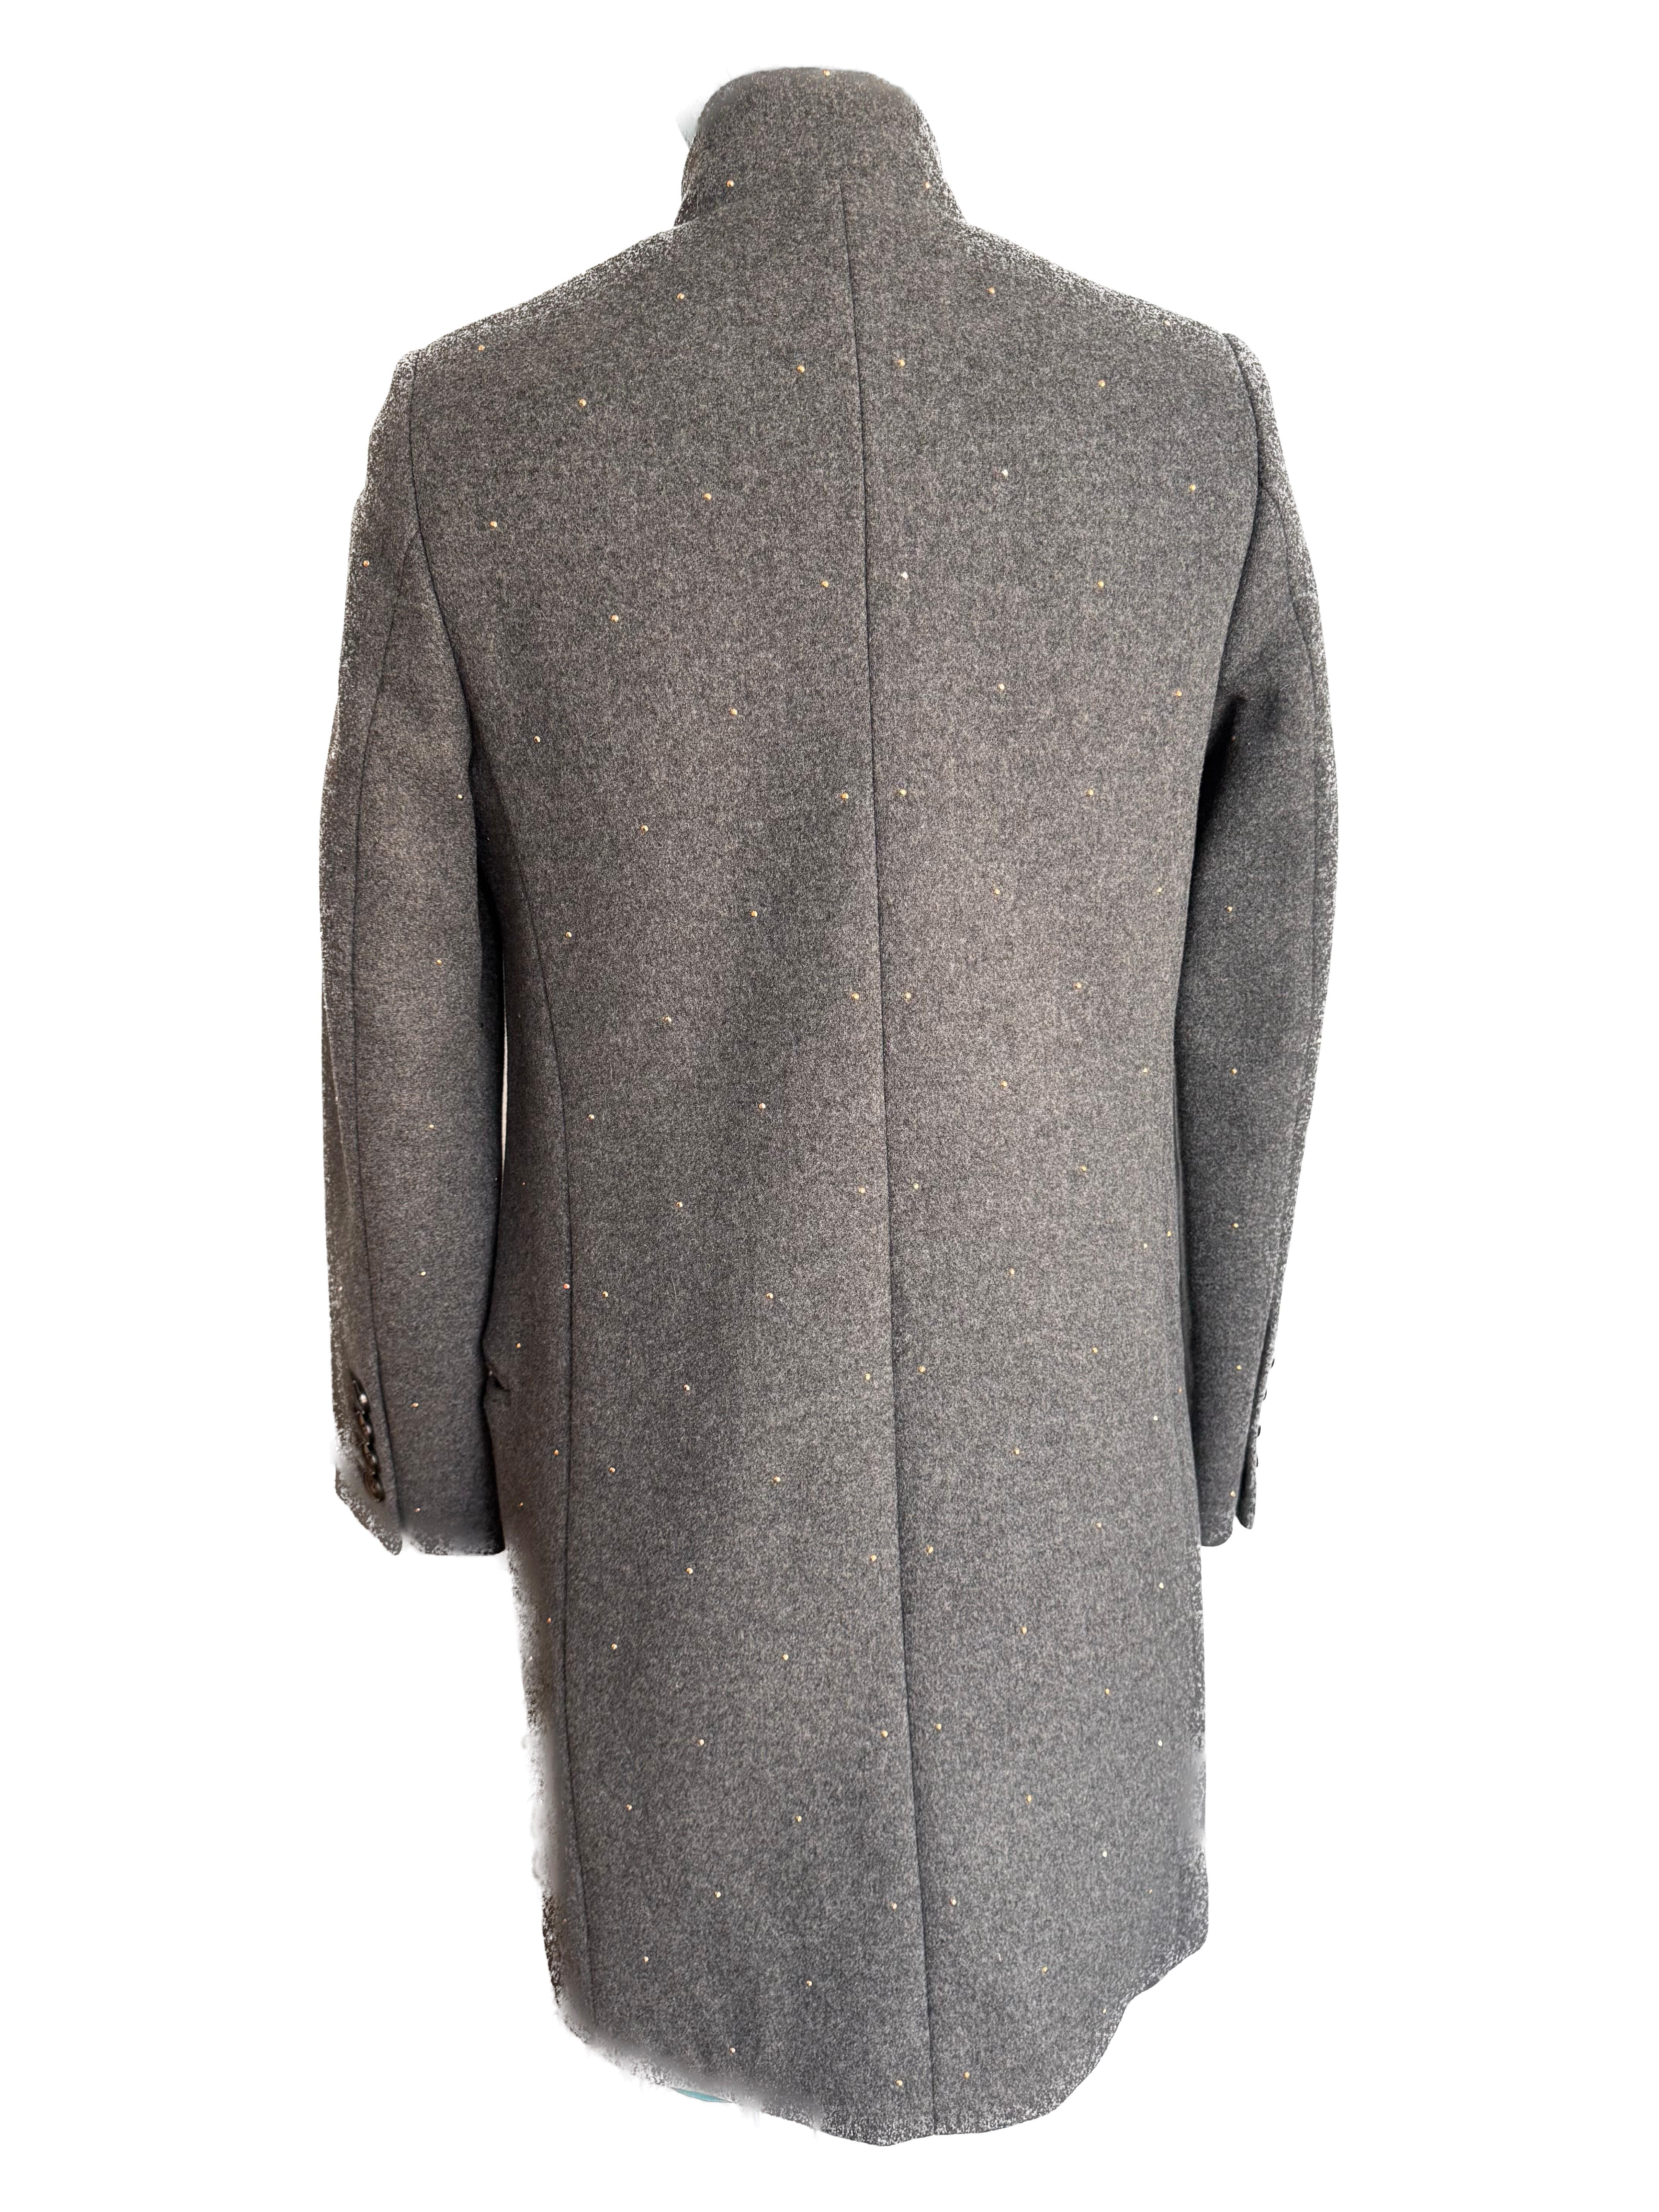 Stella McCartney Grey wool blazer coat with gold studs  In Excellent Condition For Sale In Toronto, CA